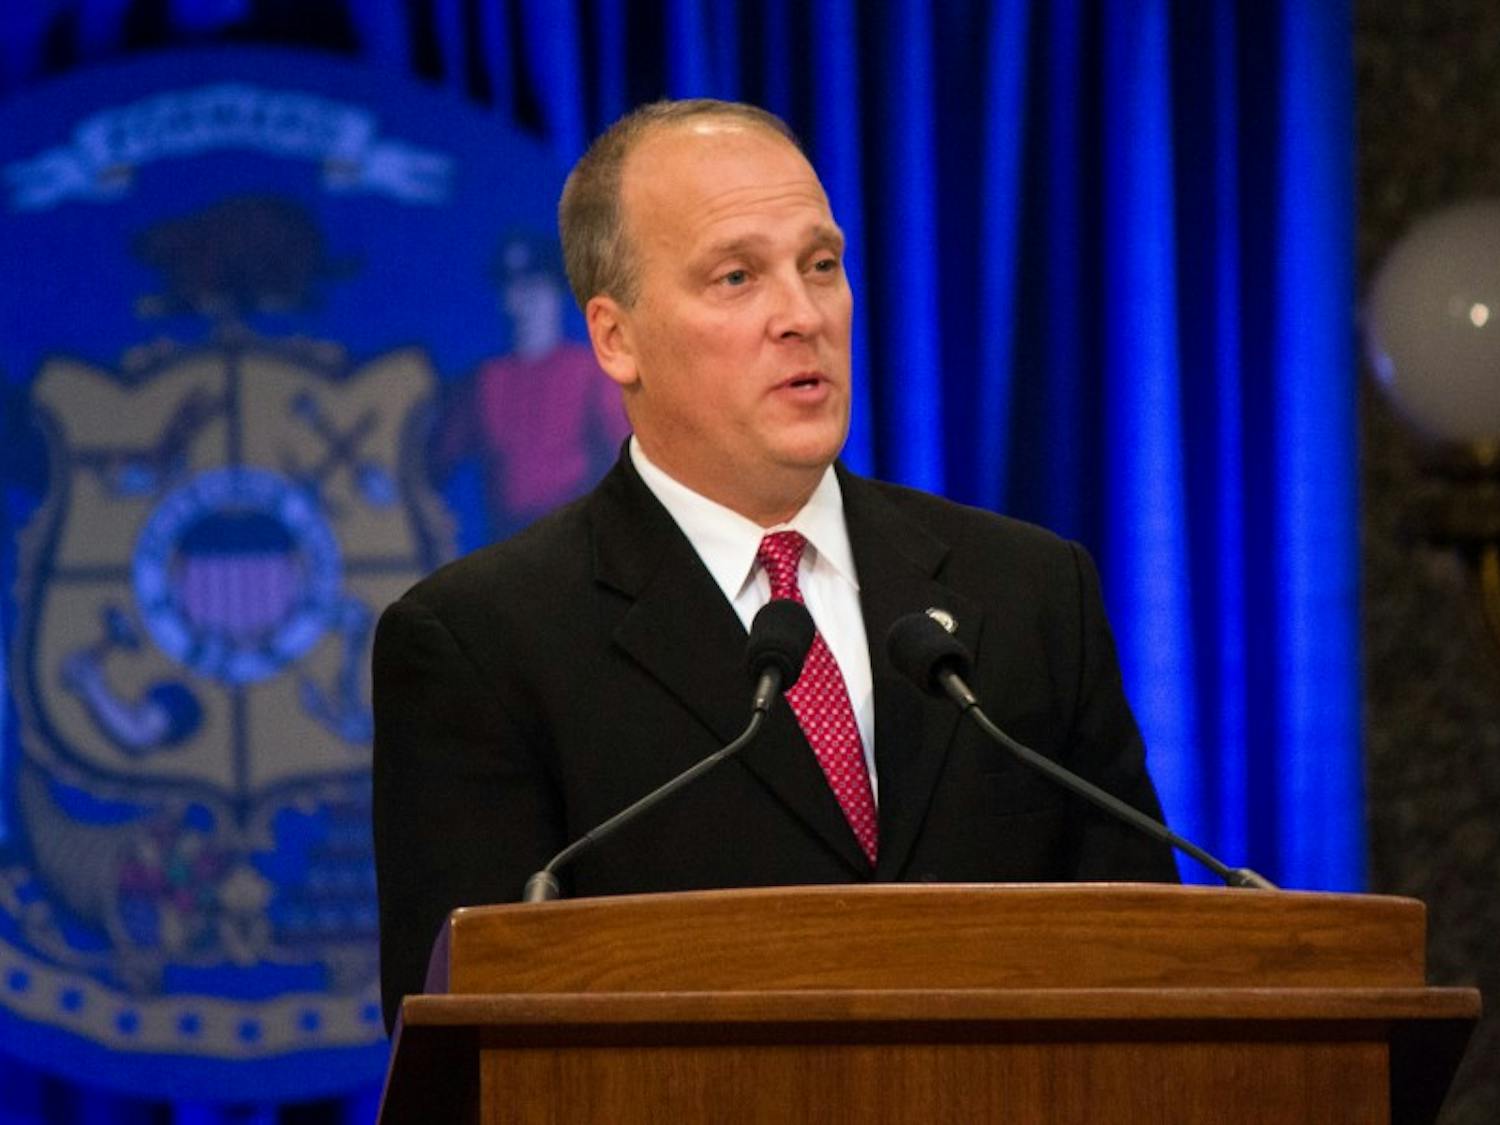 State Attorney Brad Schimel announced Wednesday the state would begin processing over 6,000 untested rape kits.